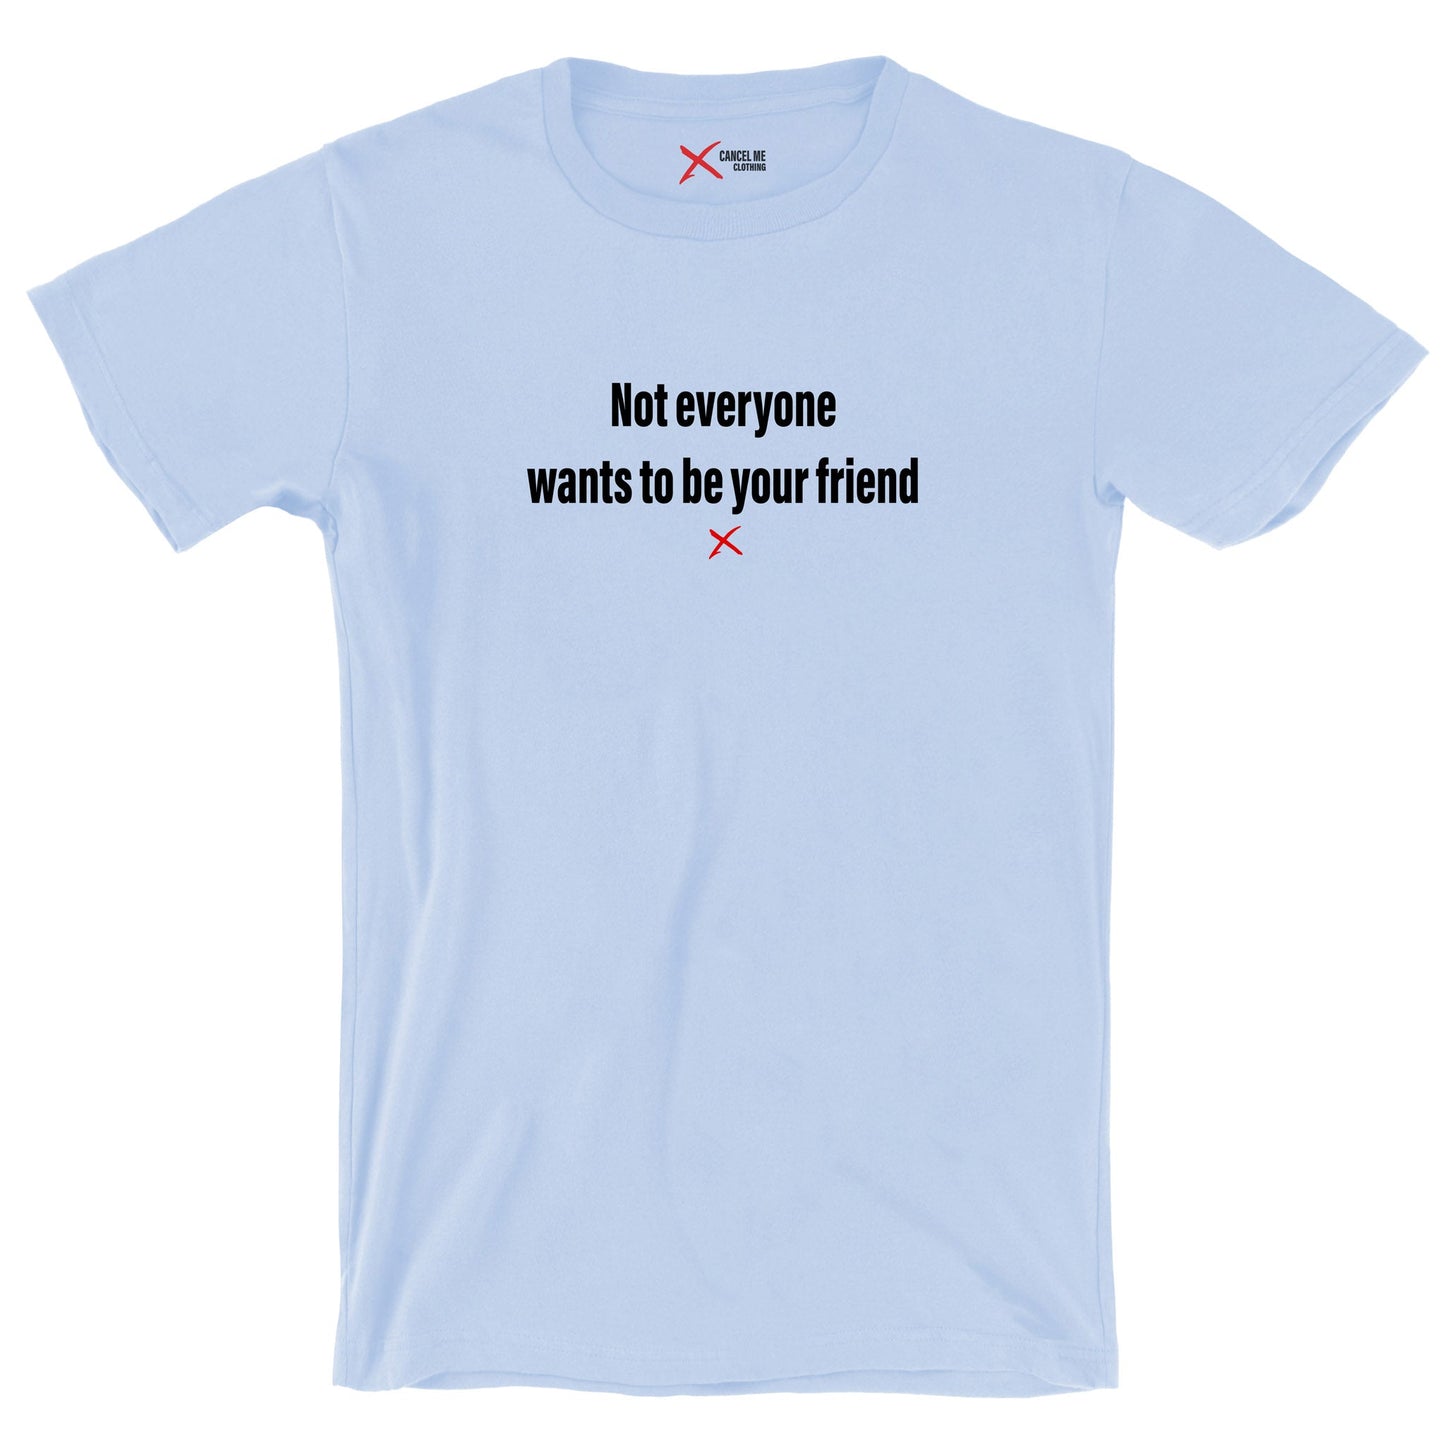 Not everyone wants to be your friend - Shirt